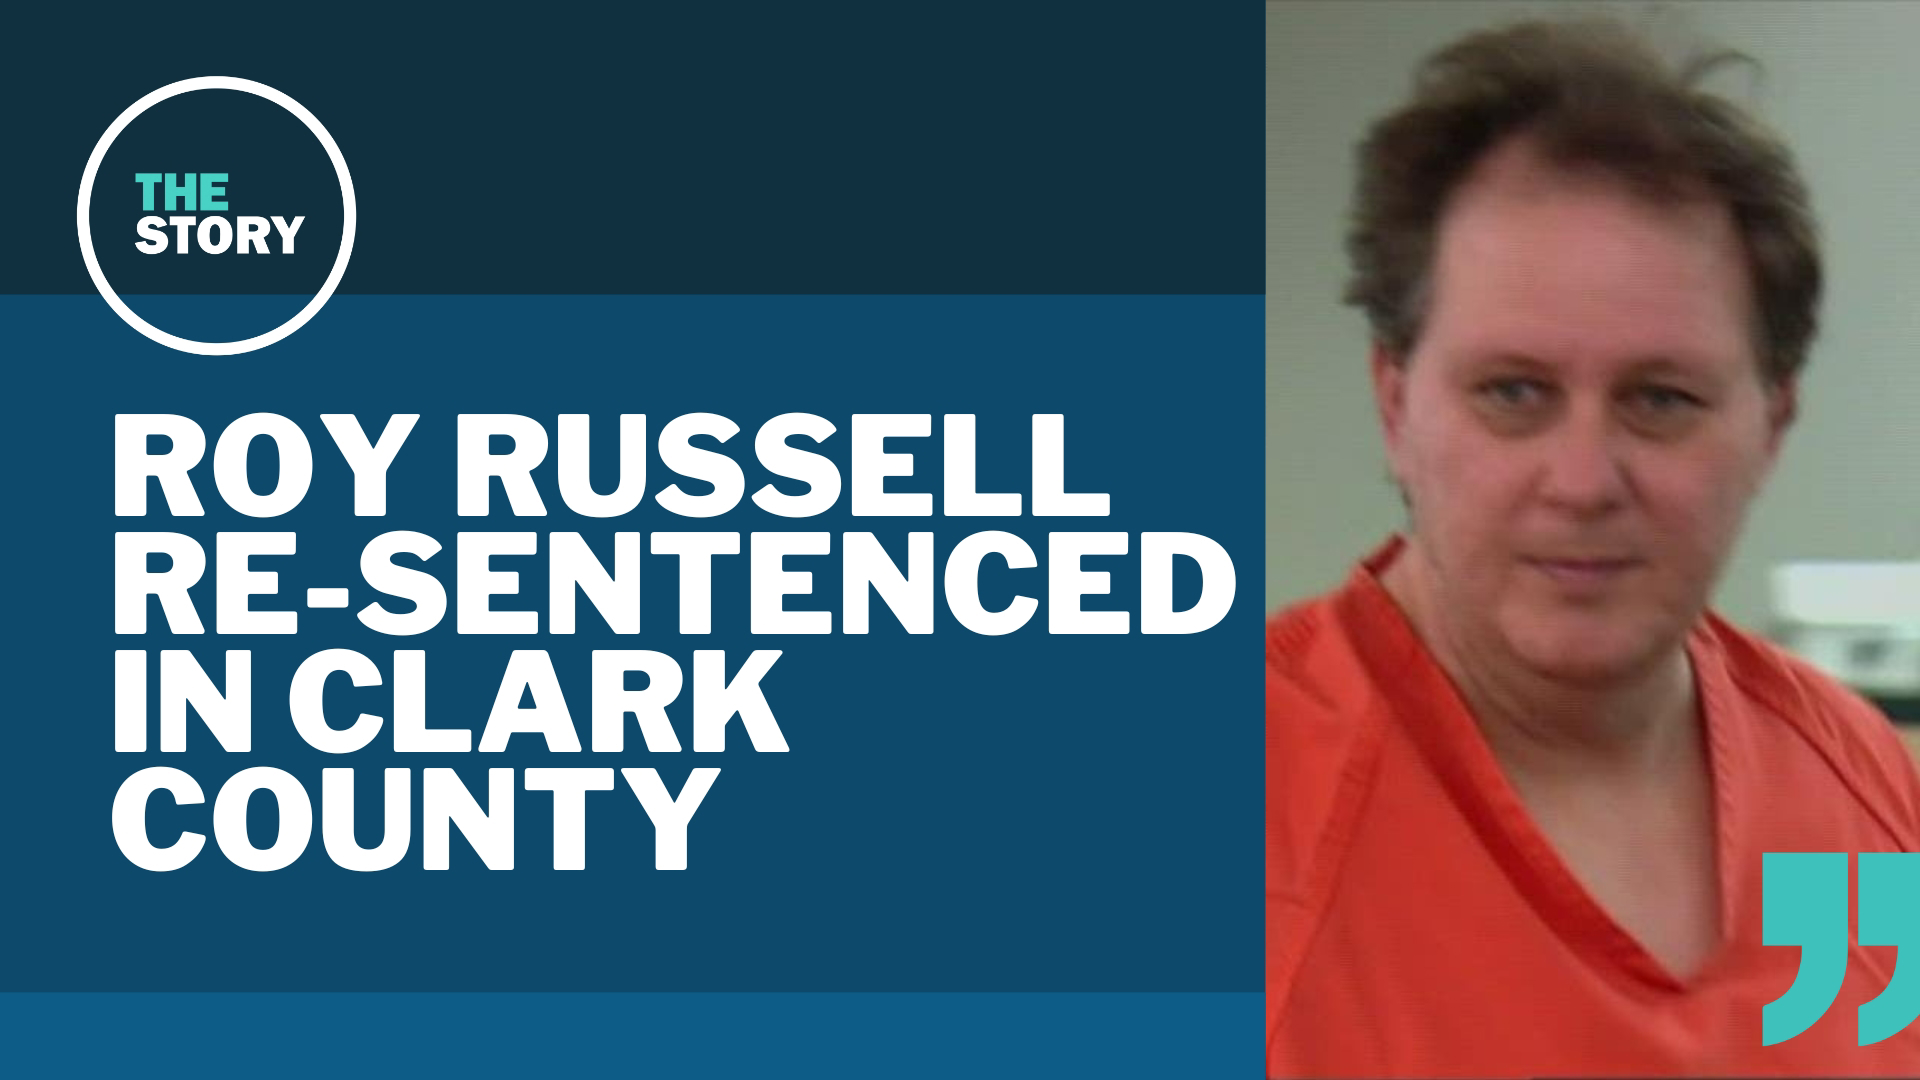 Roy Russell had his life sentenced overturned when Washington’s “three strikes” law was revised. Now he’s been sentenced to 26 years, of which he’s served 17.